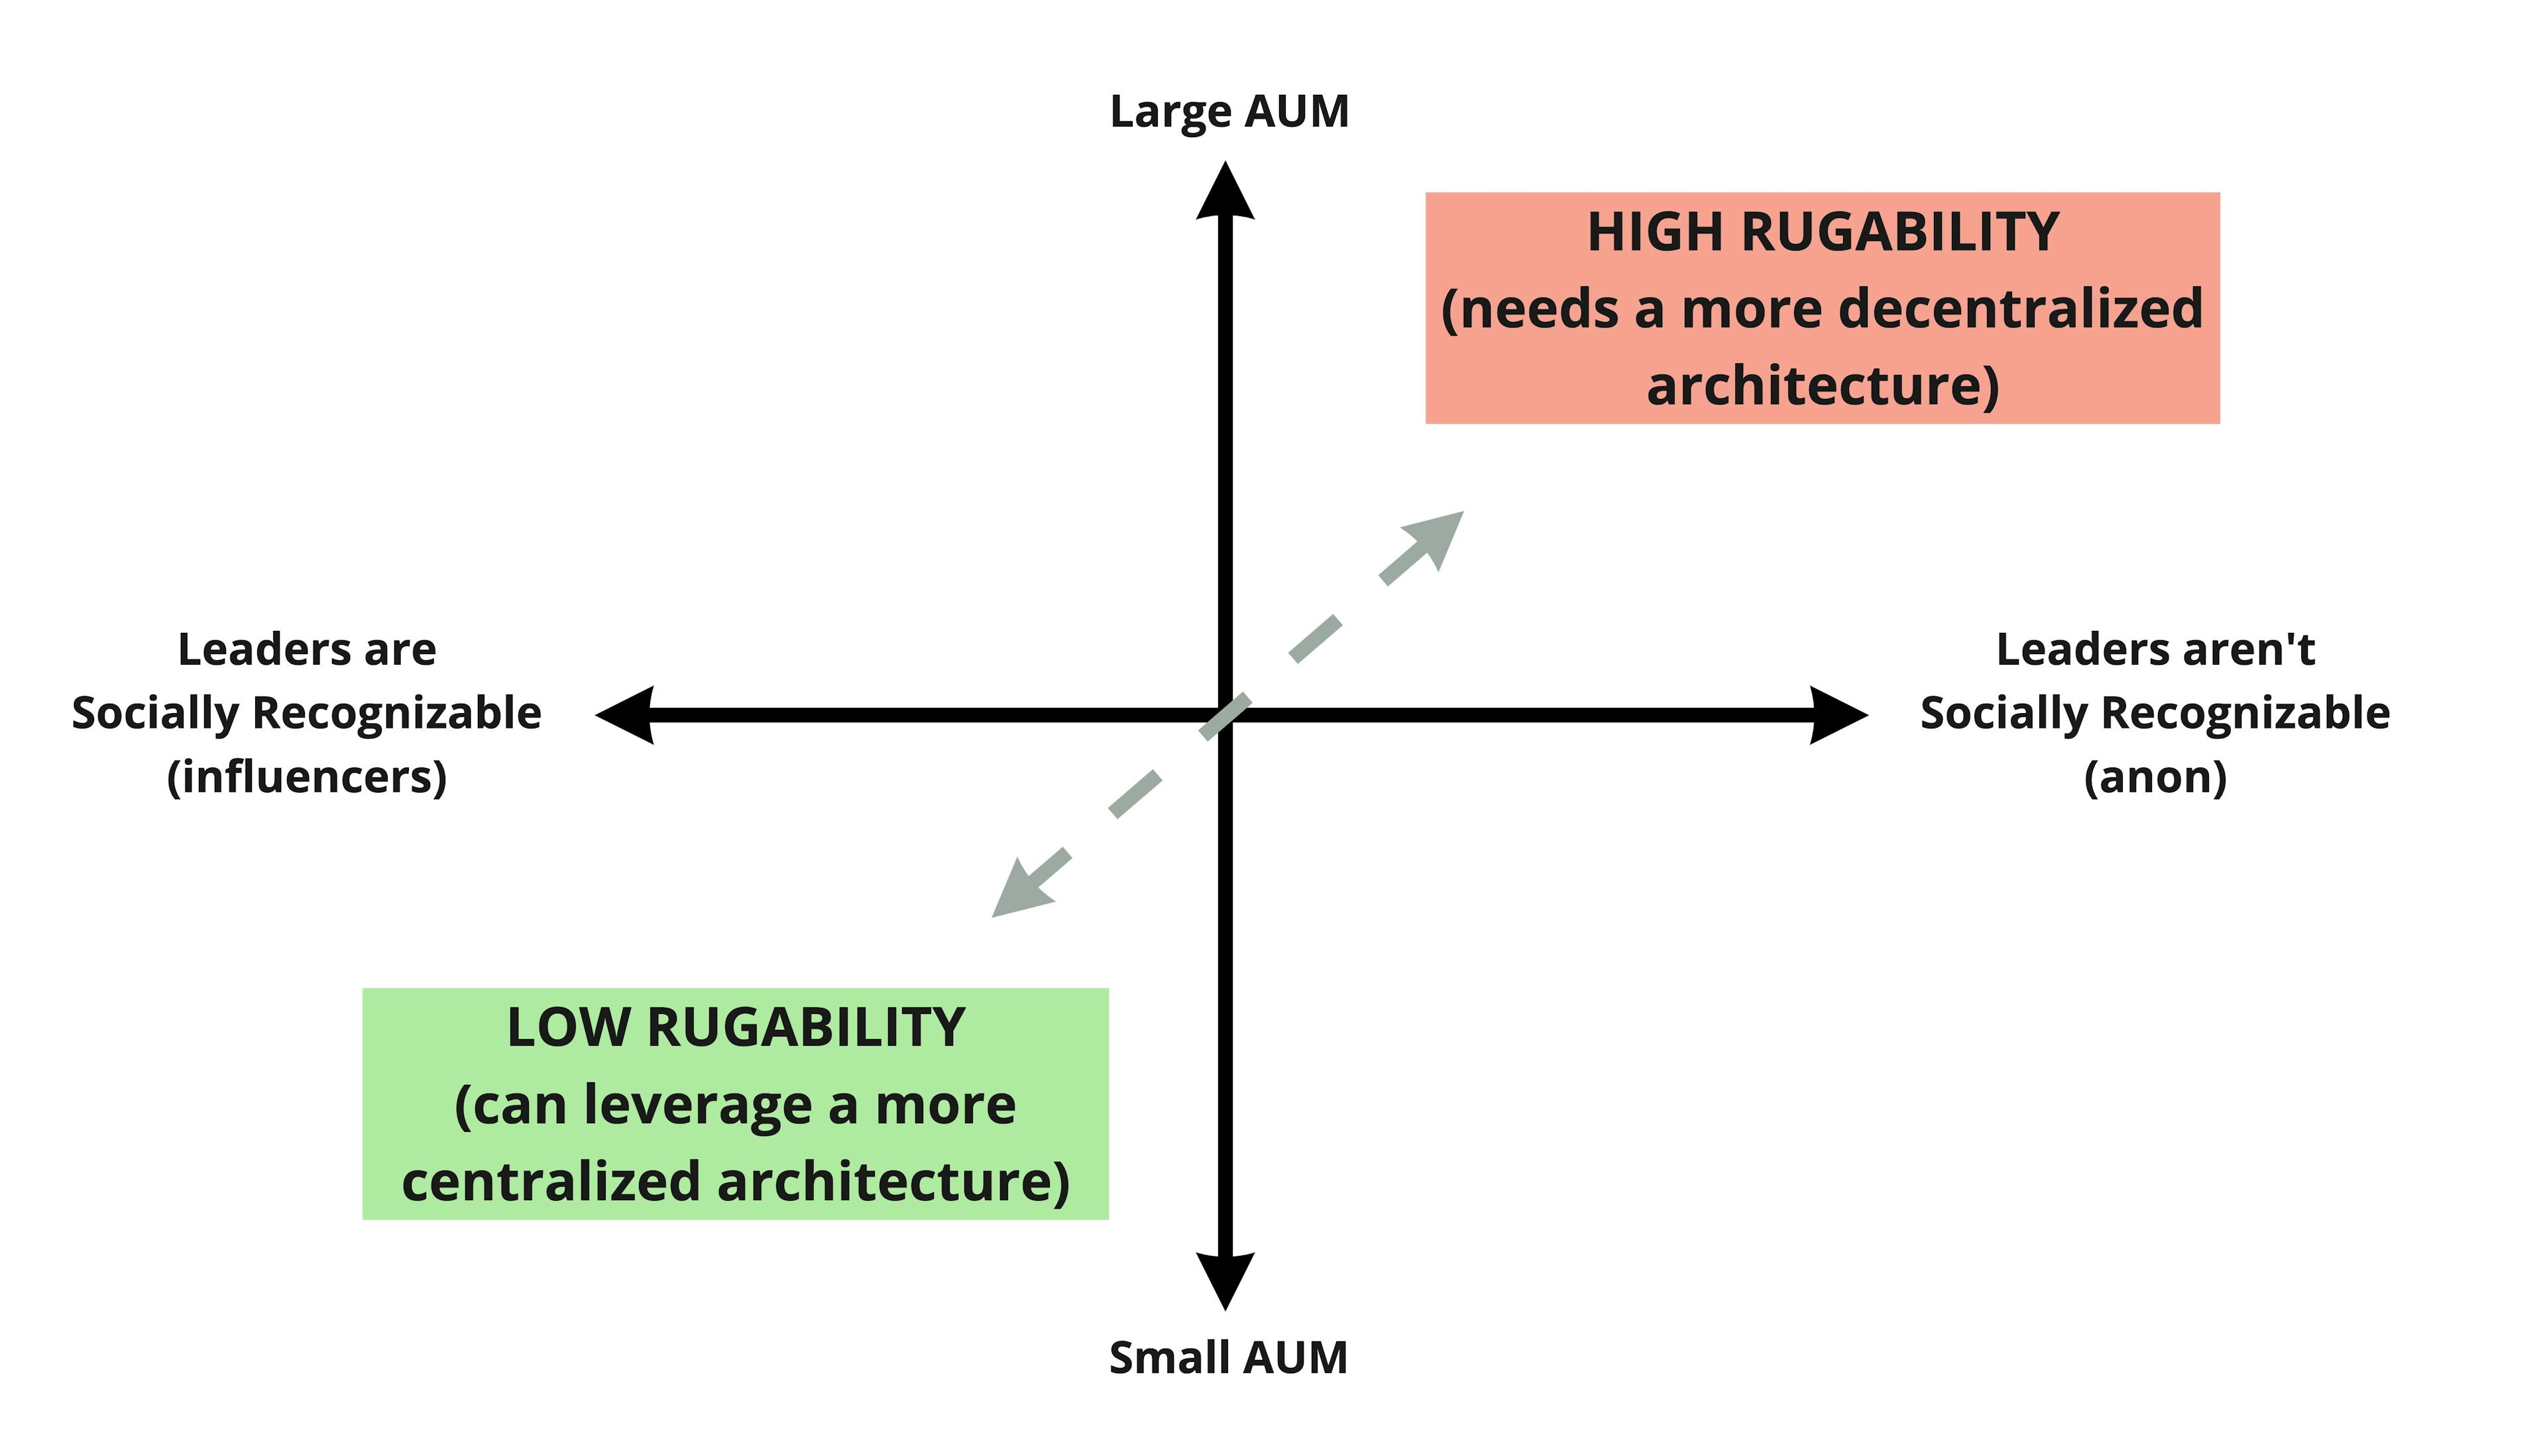 The difference in rugability results from the value of AUM and social capital at stake.